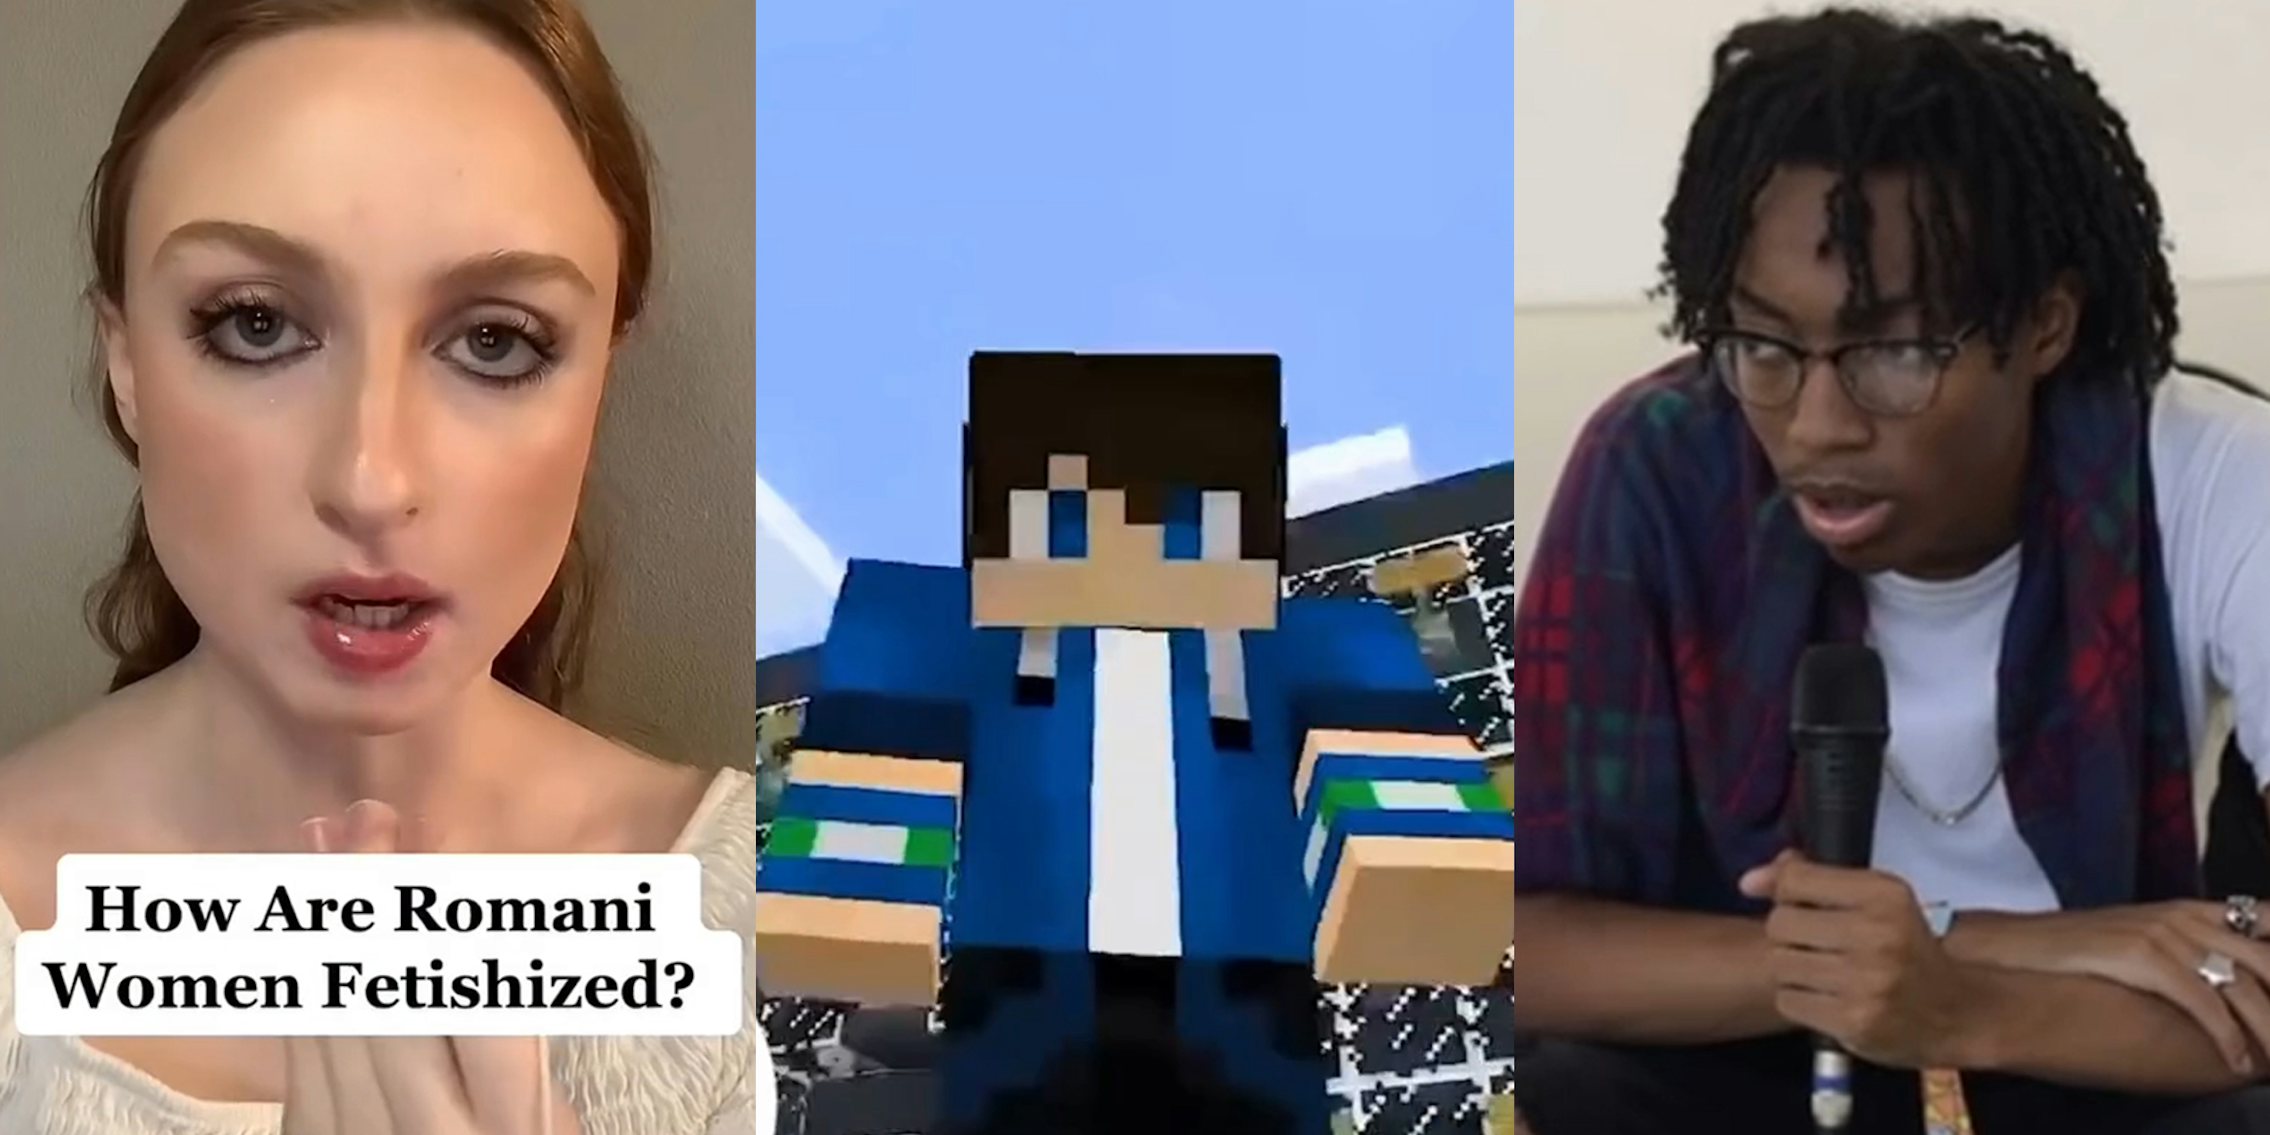 woman speaking with caption 'How Are Romani Women Fetishized?' TikTok (l) Minecraft player with sky (c) man speaking into microphone TikTok